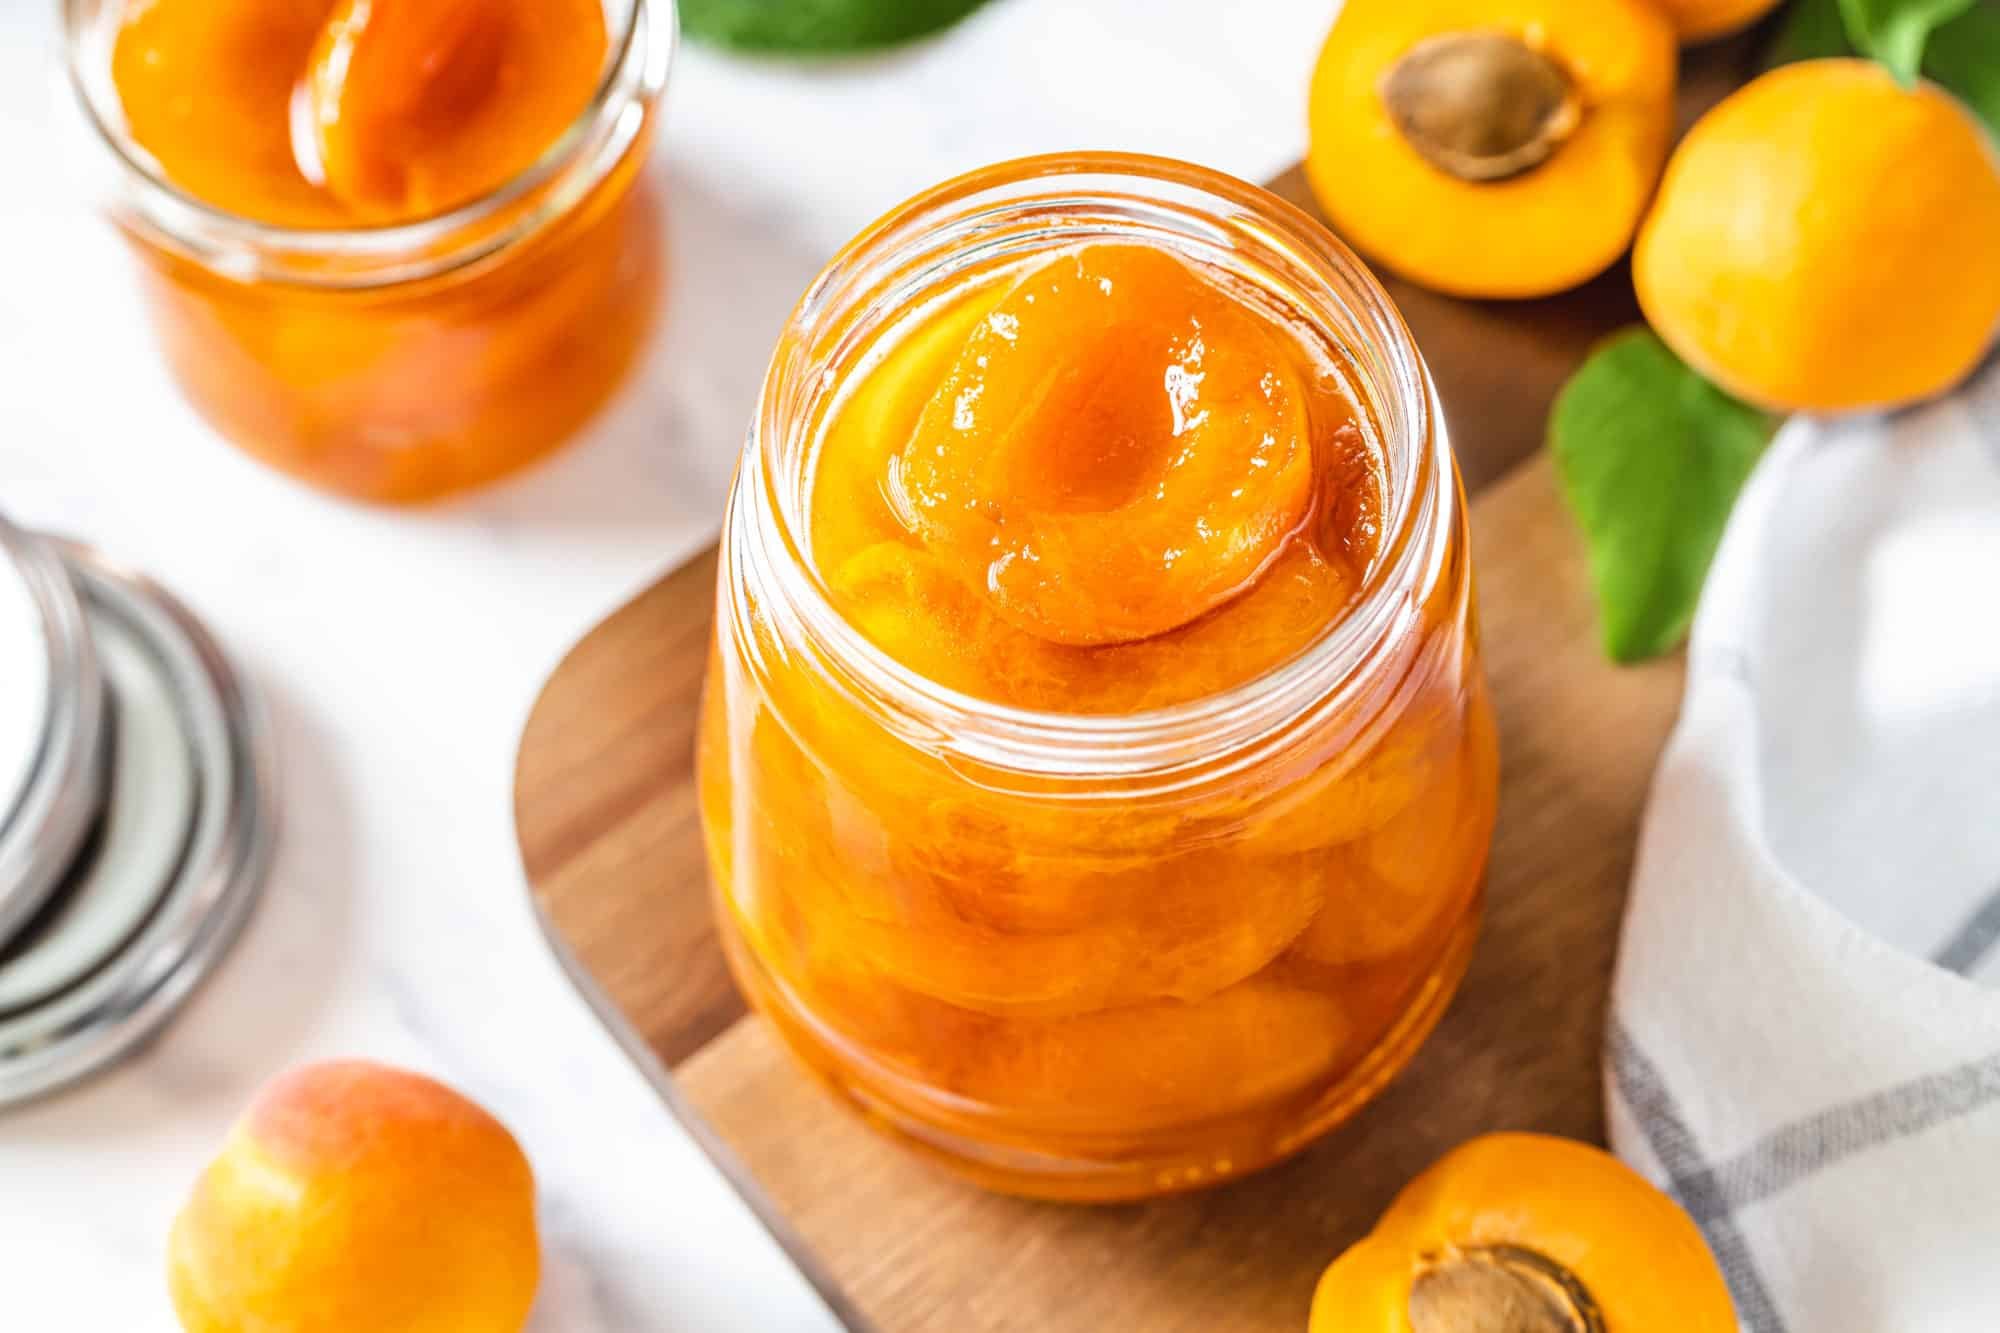 Apricot jam in a glass jar on a wooden board.